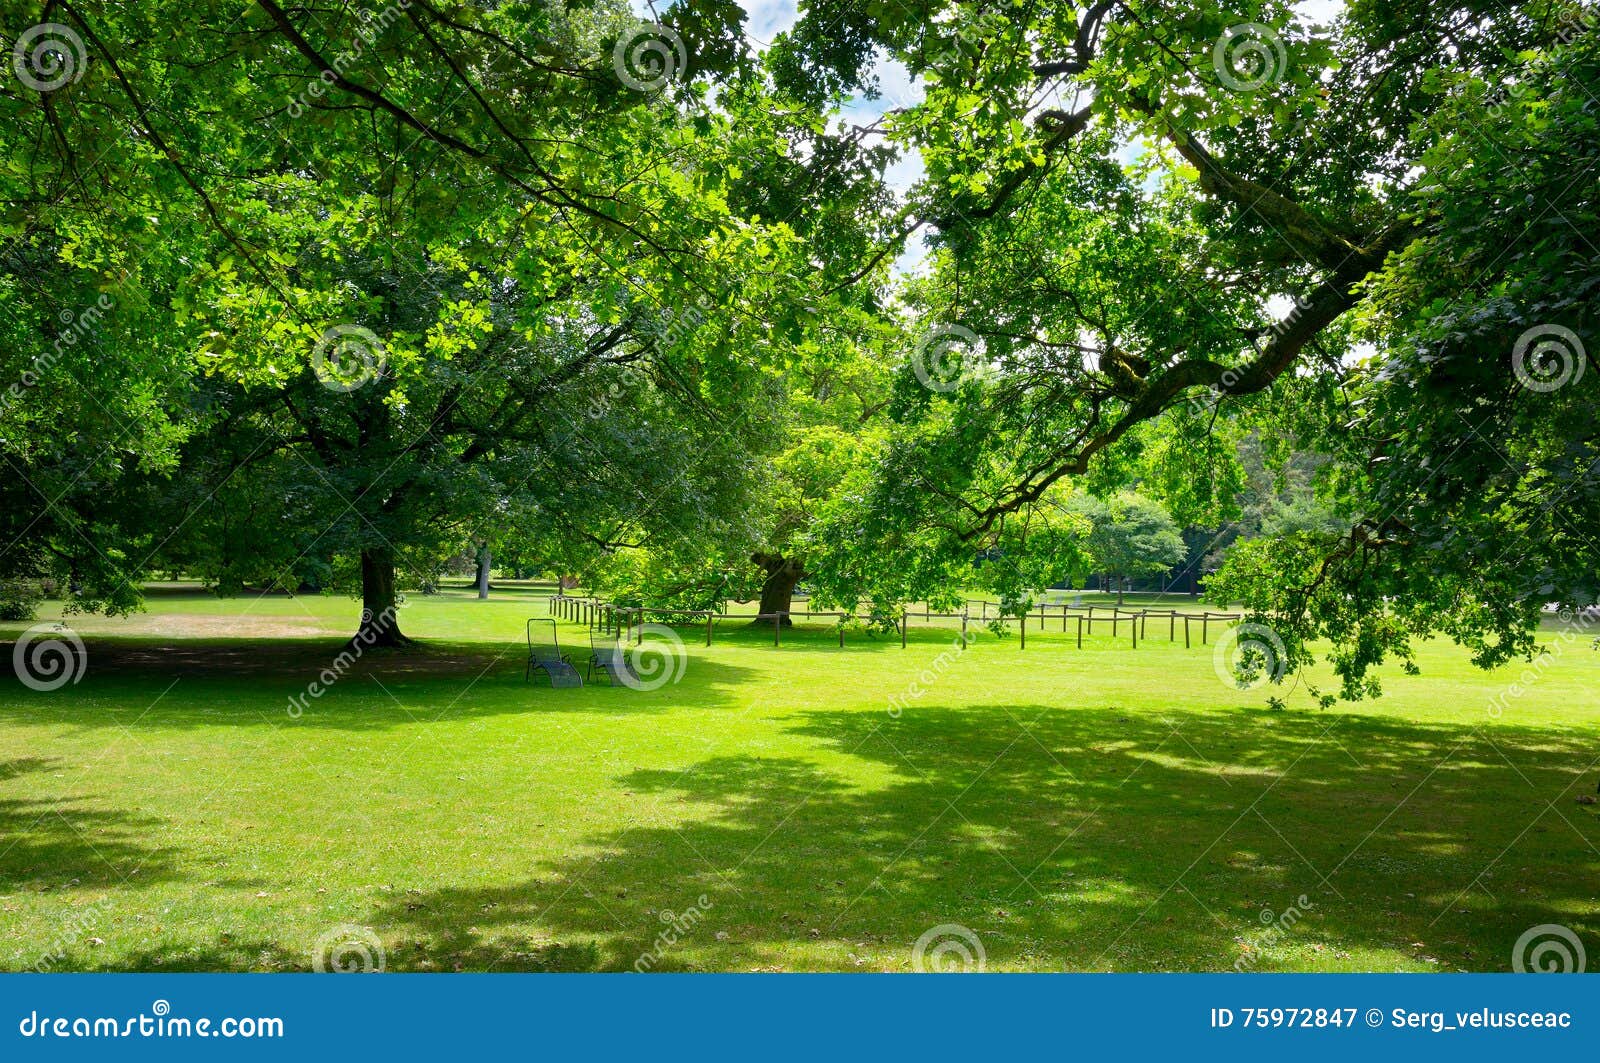 Sunny Meadow with Green Grass and Large Trees Stock Image - Image of ...